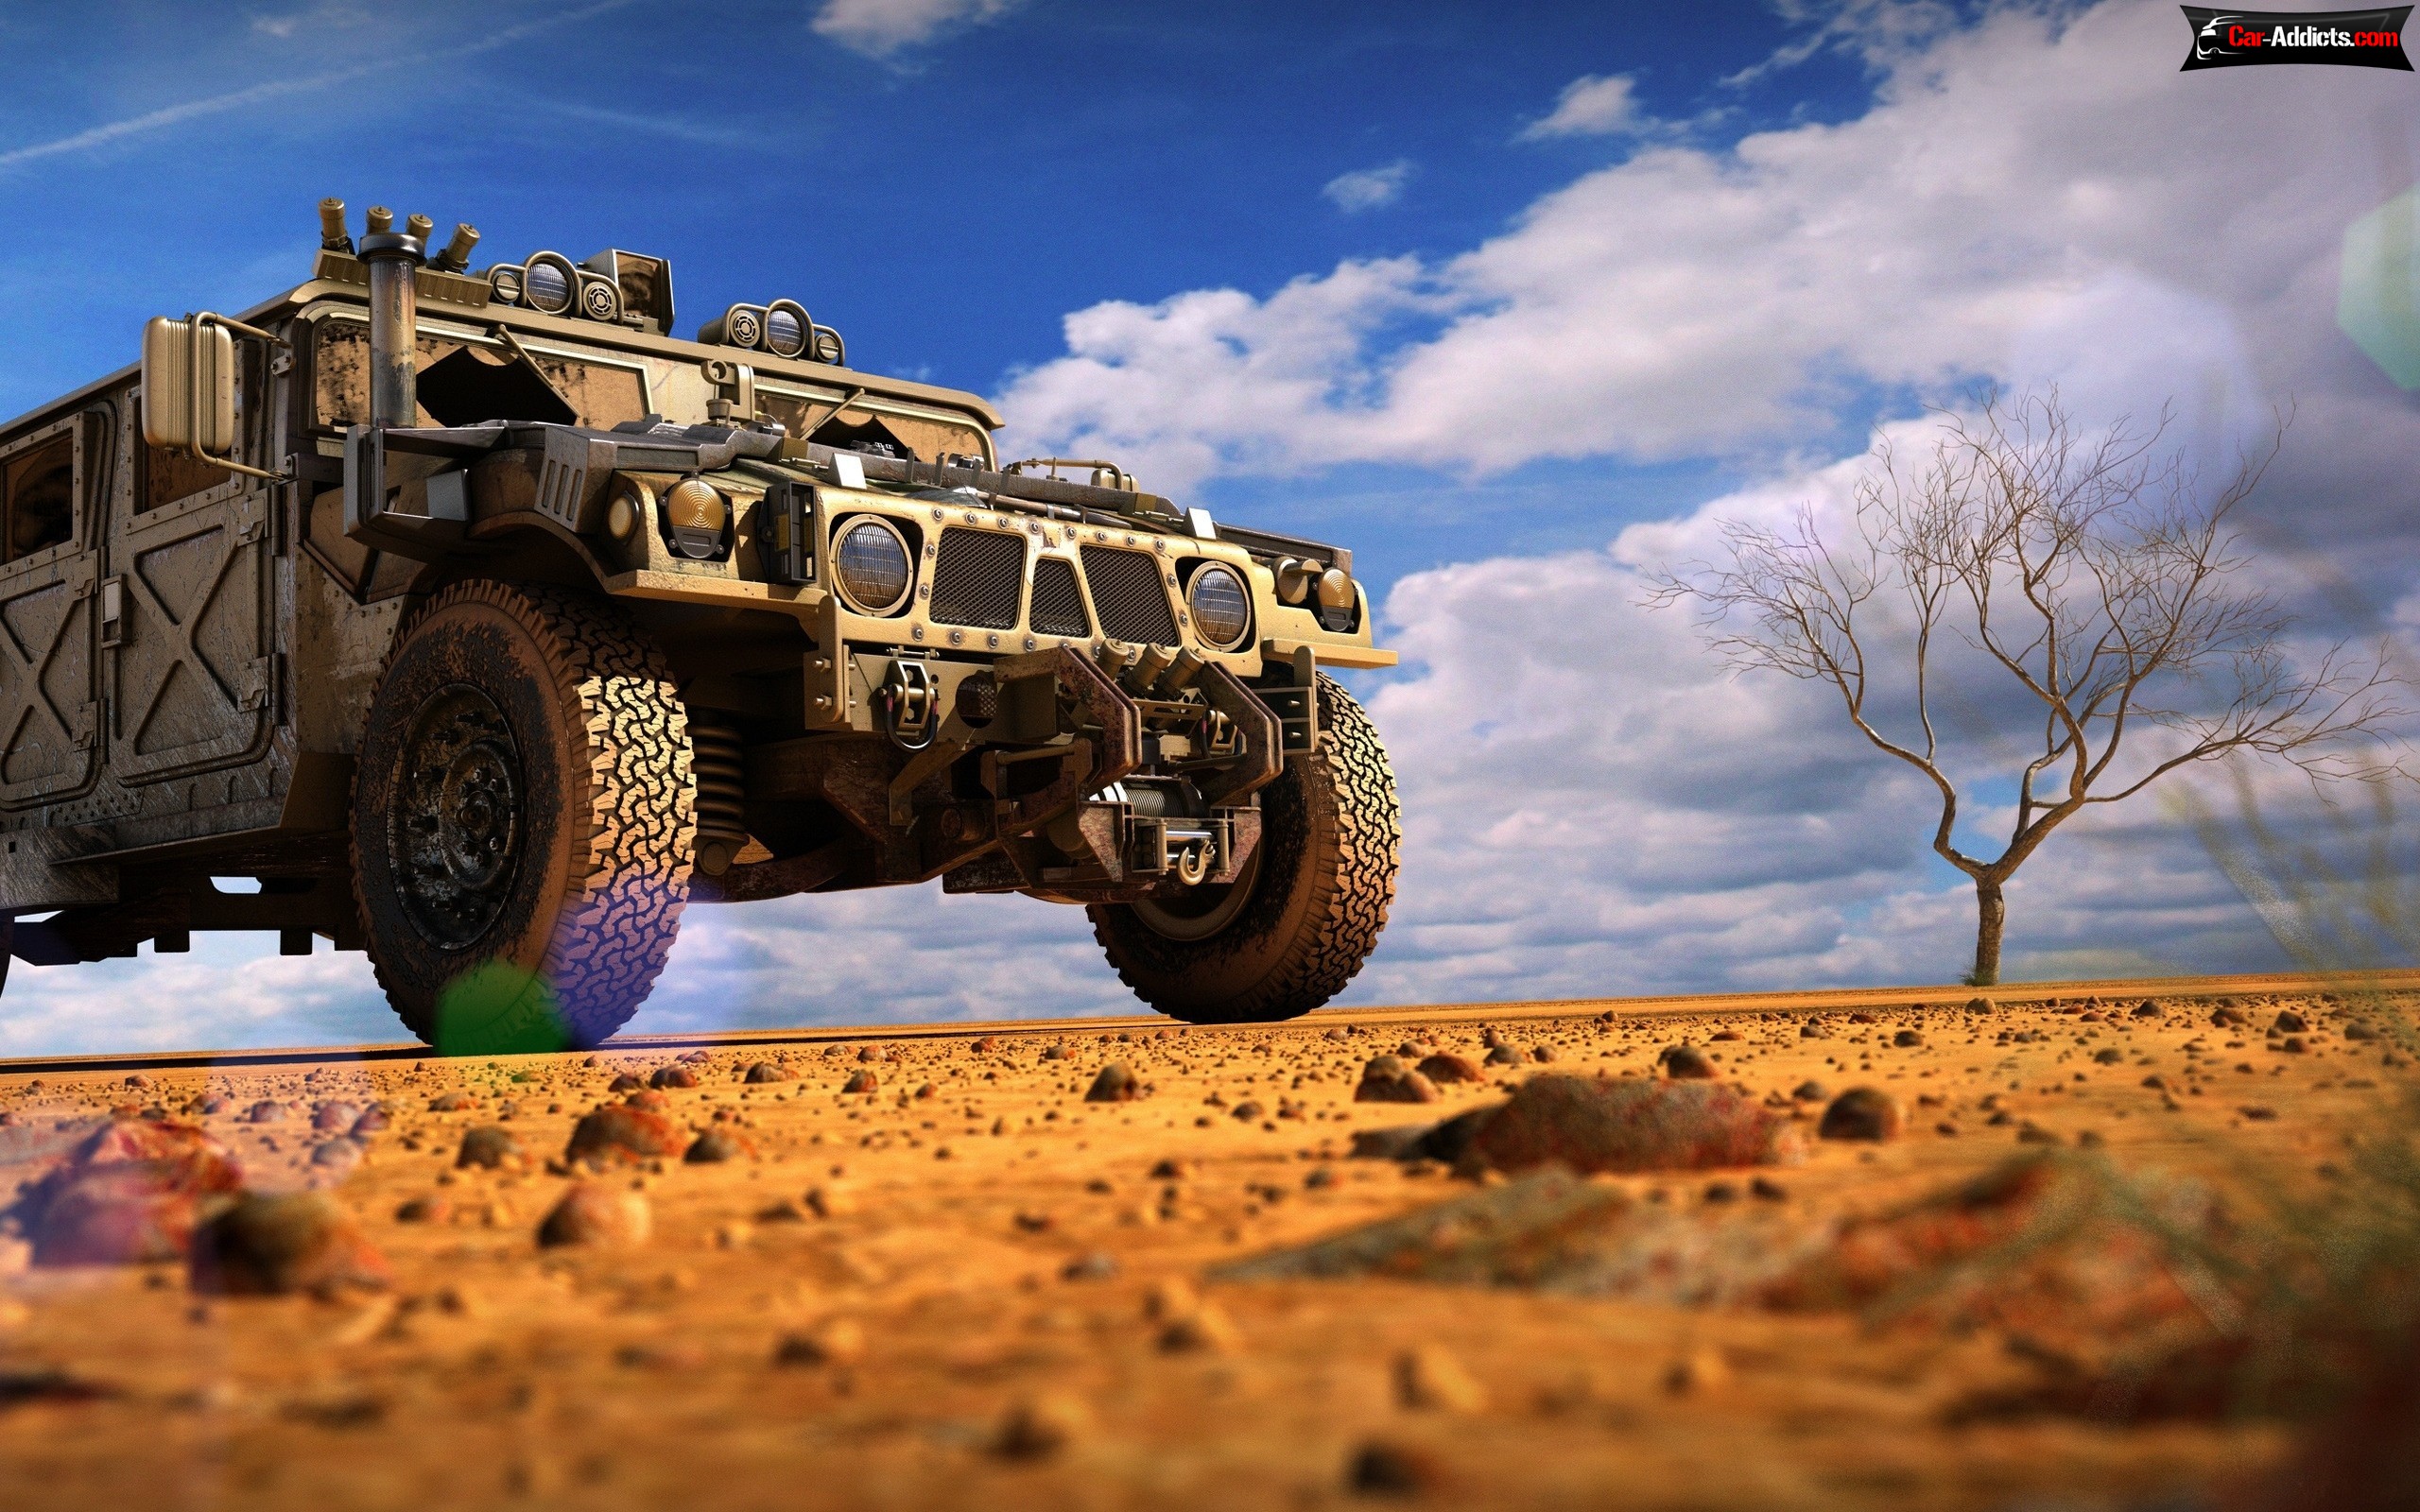 Images tagged hummer hd wallpapers